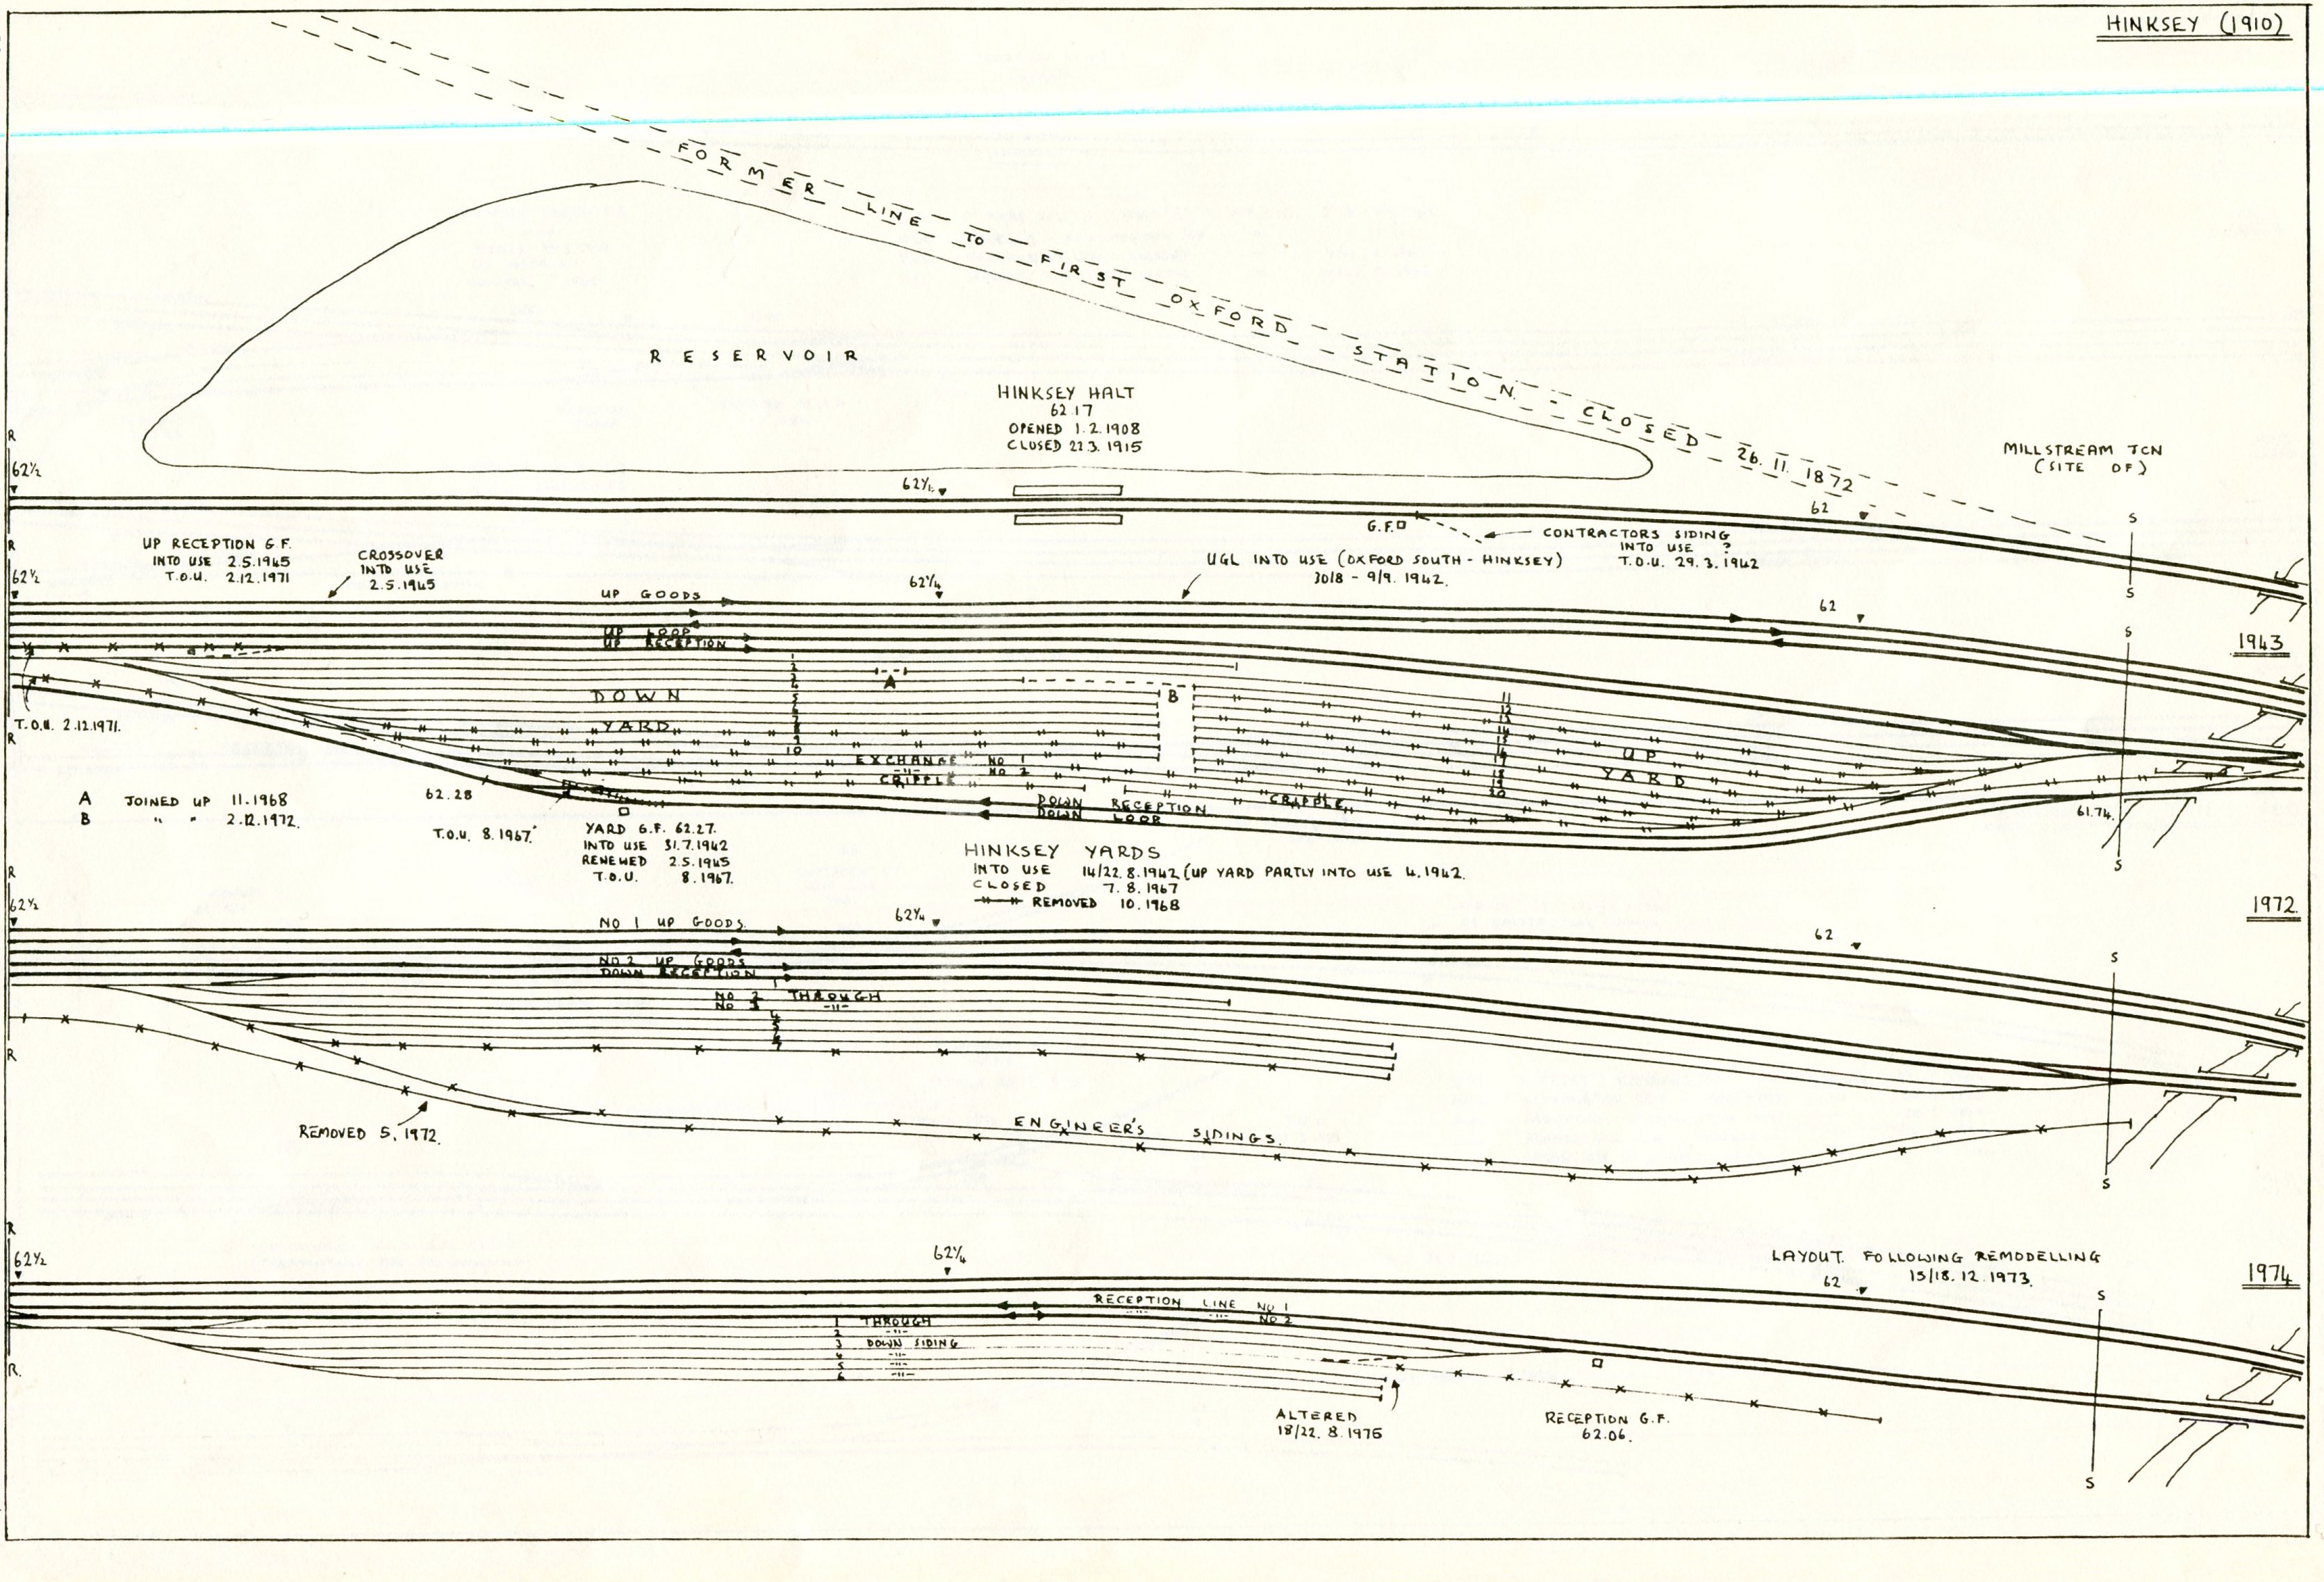 Plan showing the development and demise of Hinksey Yard 1943 1974